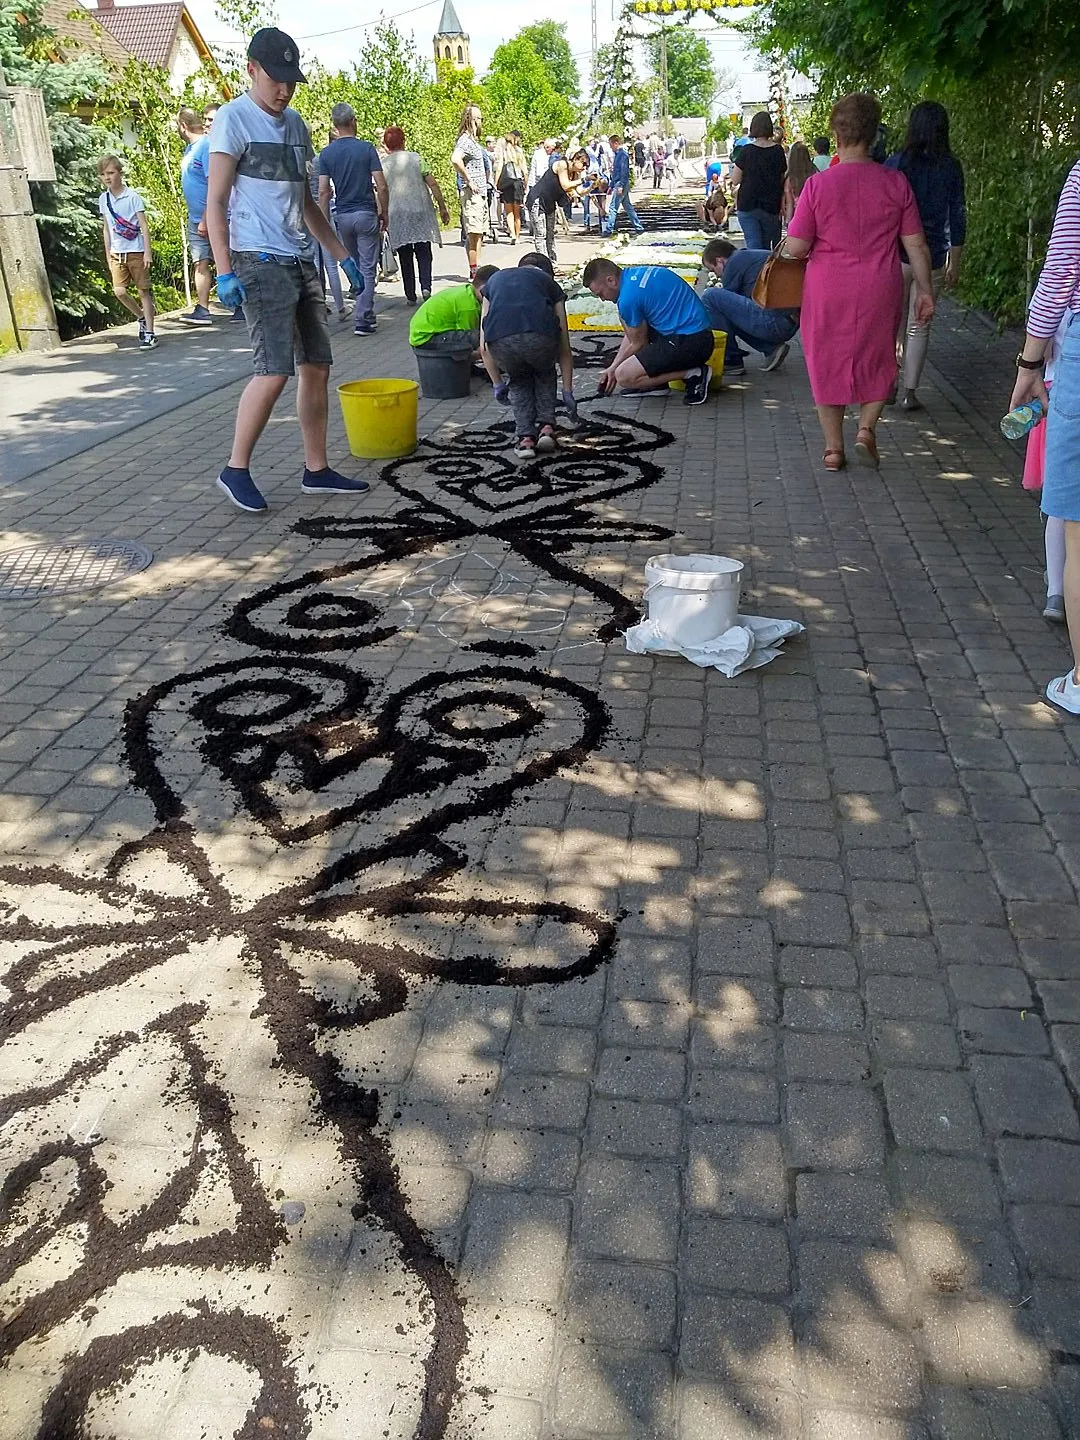 Photo showing: Every year at Corpus Christi, parishioners from Spycimierz in Poland lay a two-kilometer-long colorful carpet of living flowers. Before the flowers are arranged, the outlines of the pattern are created with black soil or white sand. On this day many visitors come here to admire the work of the inhabitants.